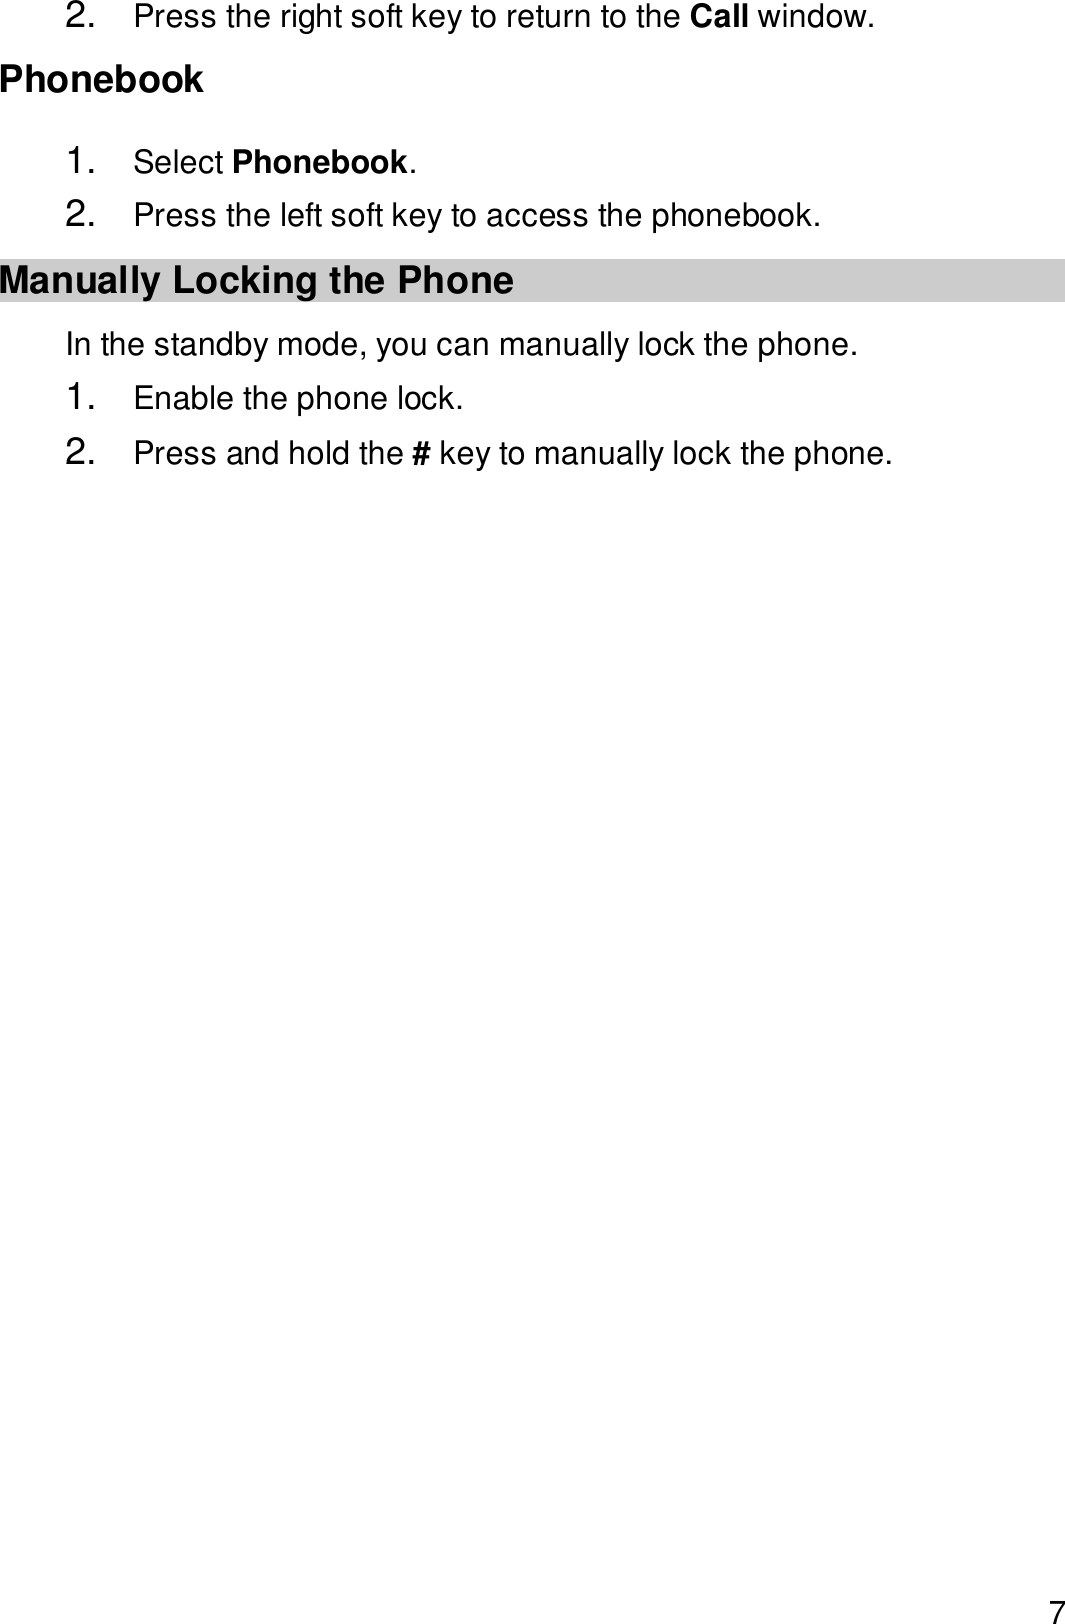  7 2.  Press the right soft key to return to the Call window. Phonebook 1.  Select Phonebook. 2.  Press the left soft key to access the phonebook. Manually Locking the Phone In the standby mode, you can manually lock the phone. 1.  Enable the phone lock. 2.  Press and hold the # key to manually lock the phone.  